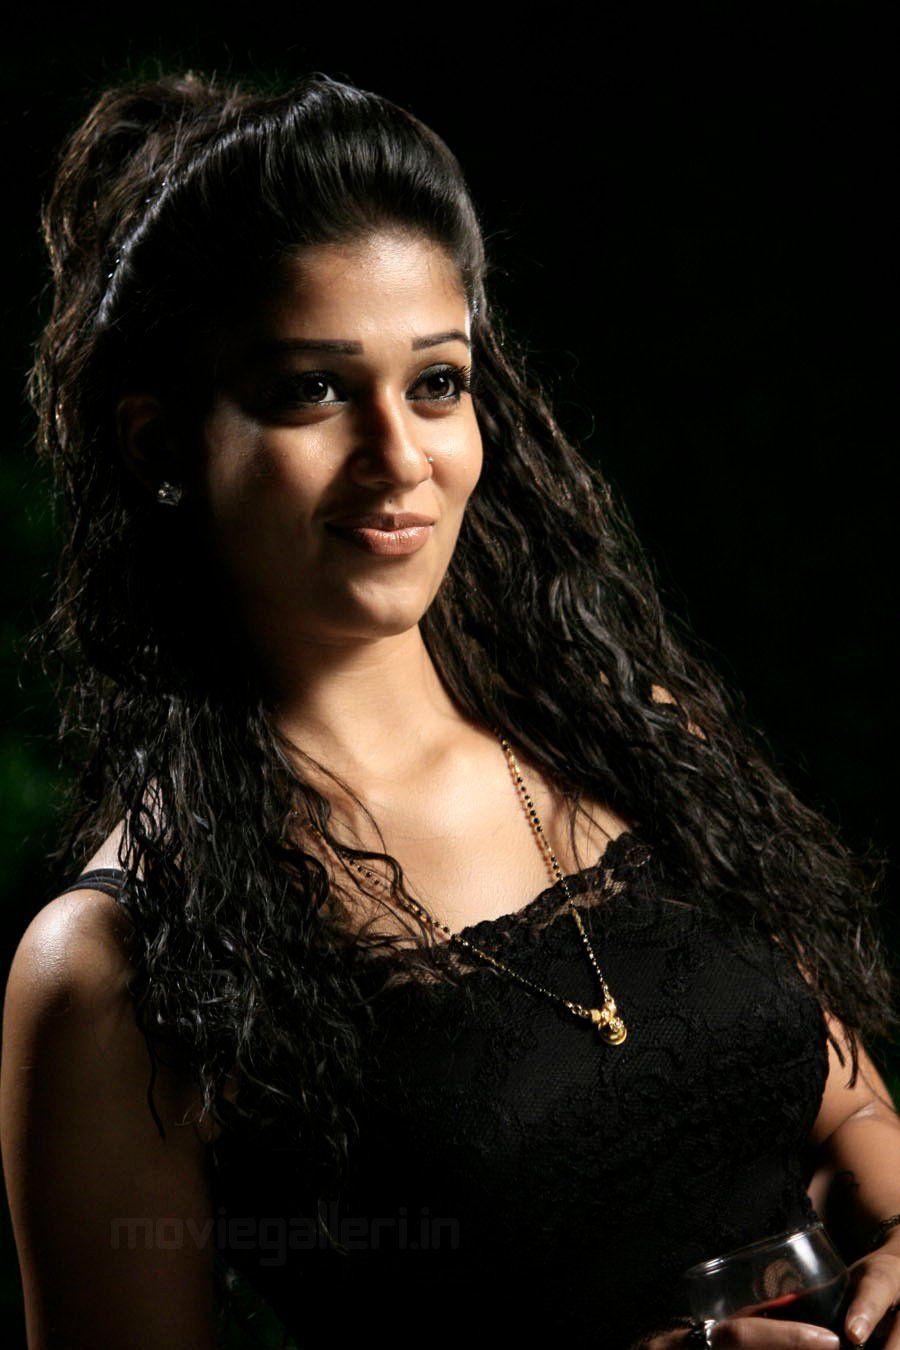  Nayanthara hd Wallpapers Photos Pictures WhatsApp Status DP Images Free  Download